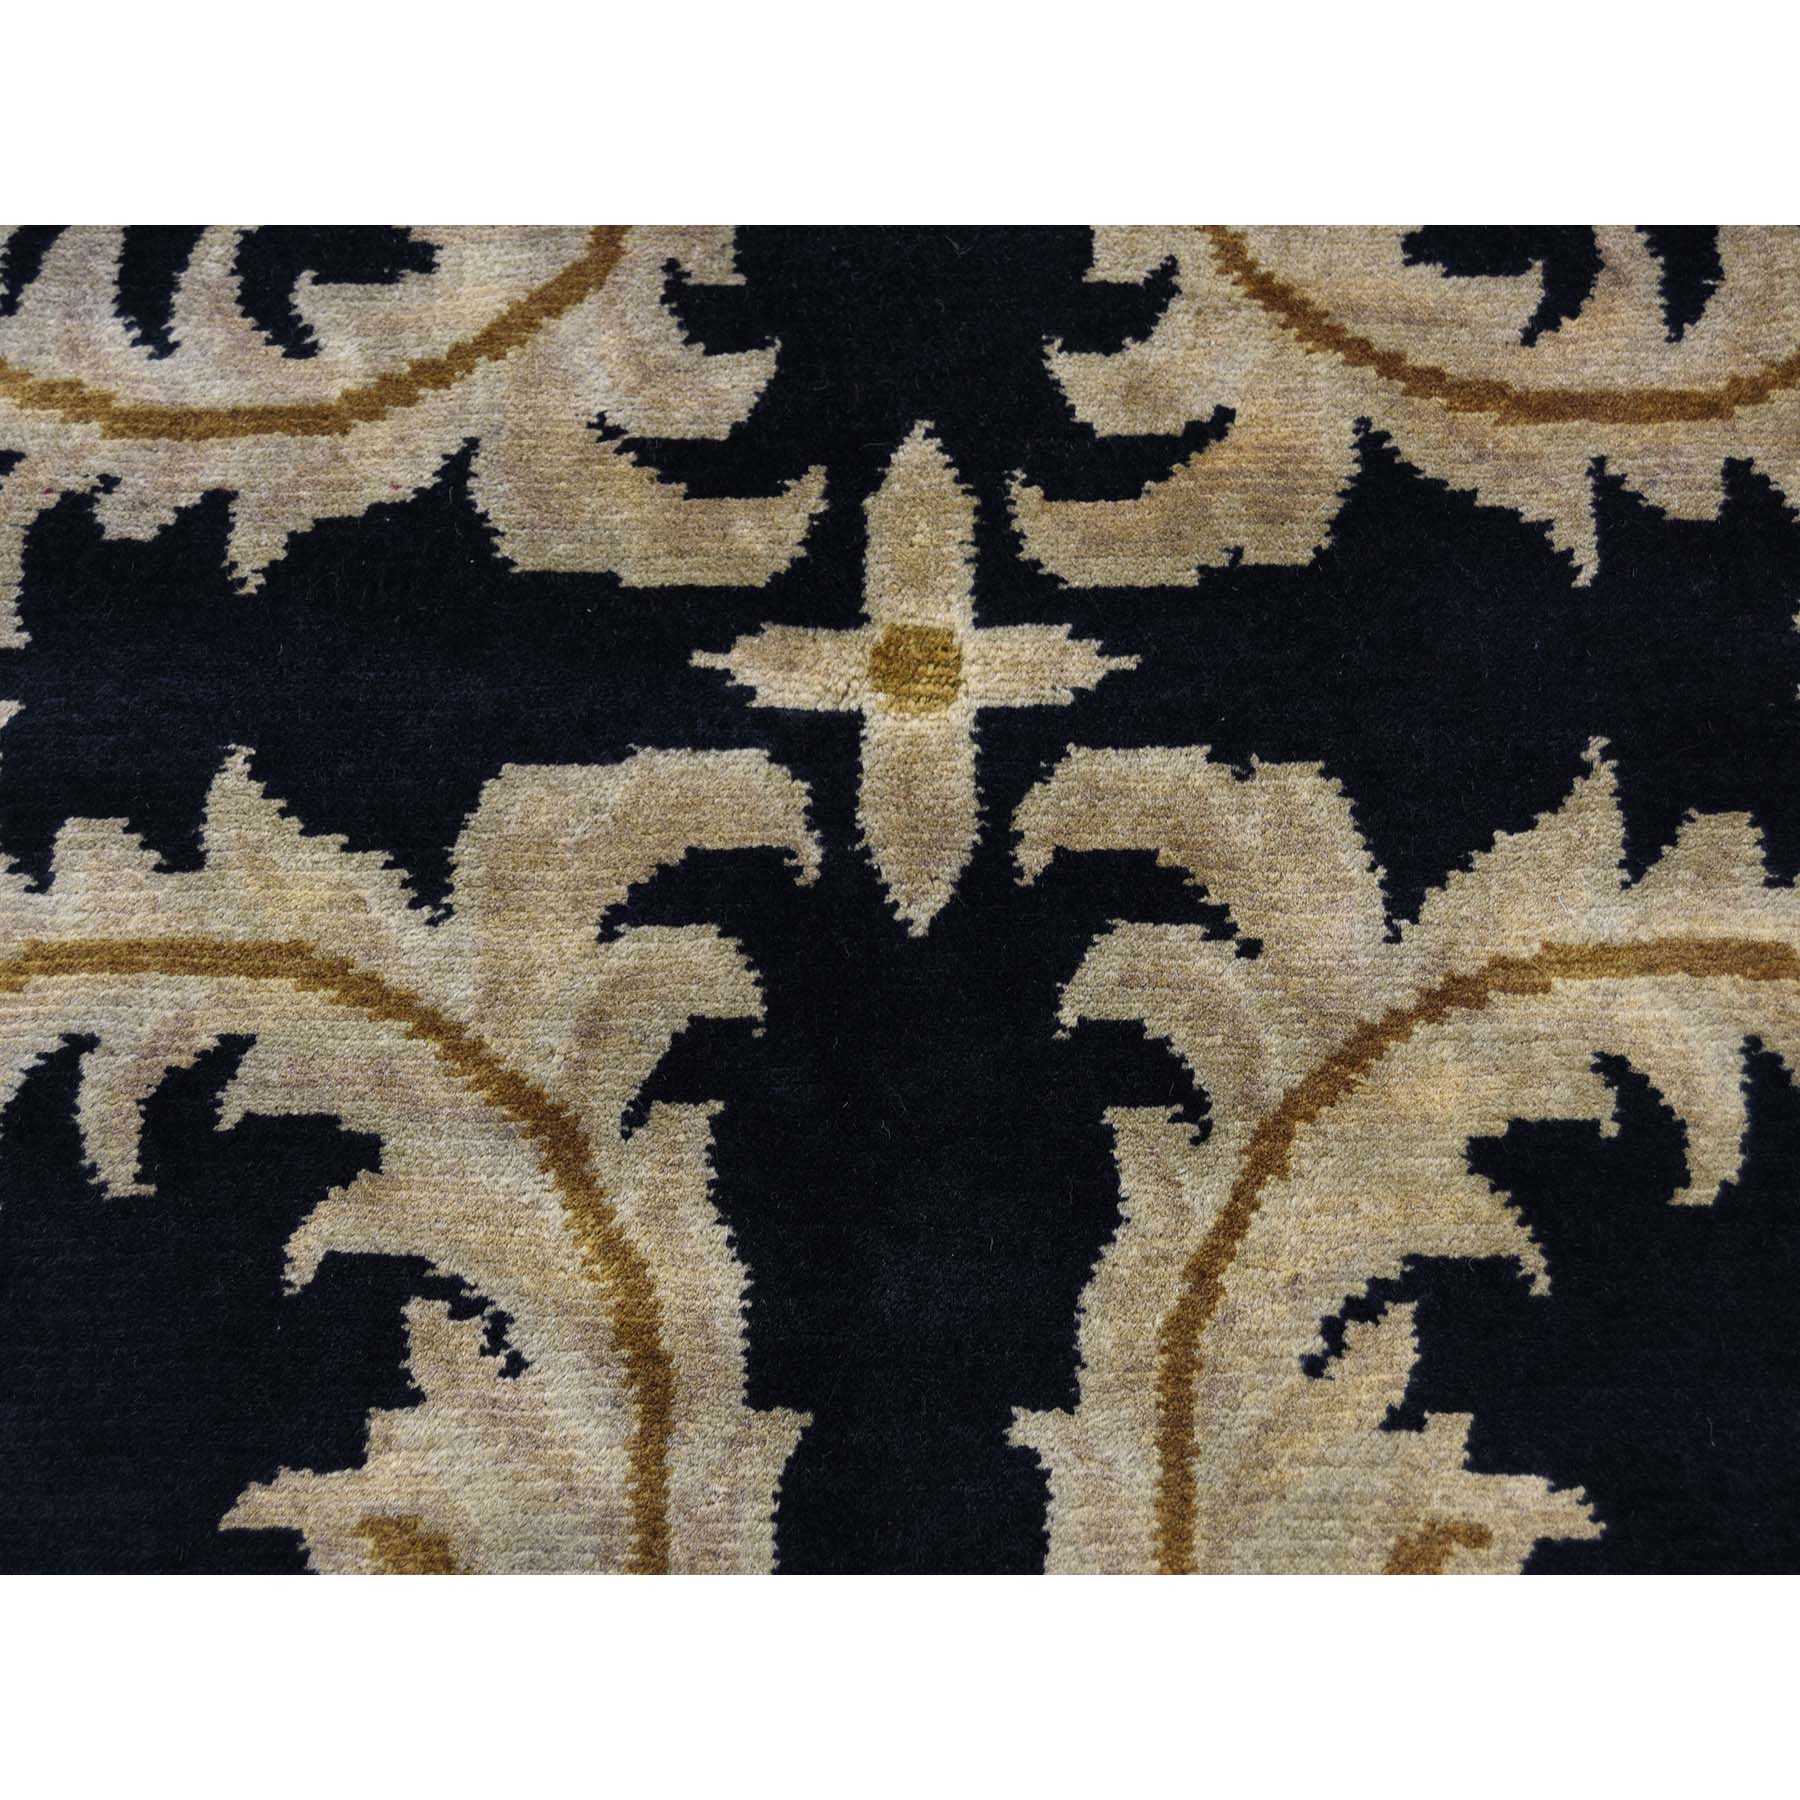 9-x12-4  On Clearance Modern Nepali with Neo Classic European Design Hand Knotted Rug 